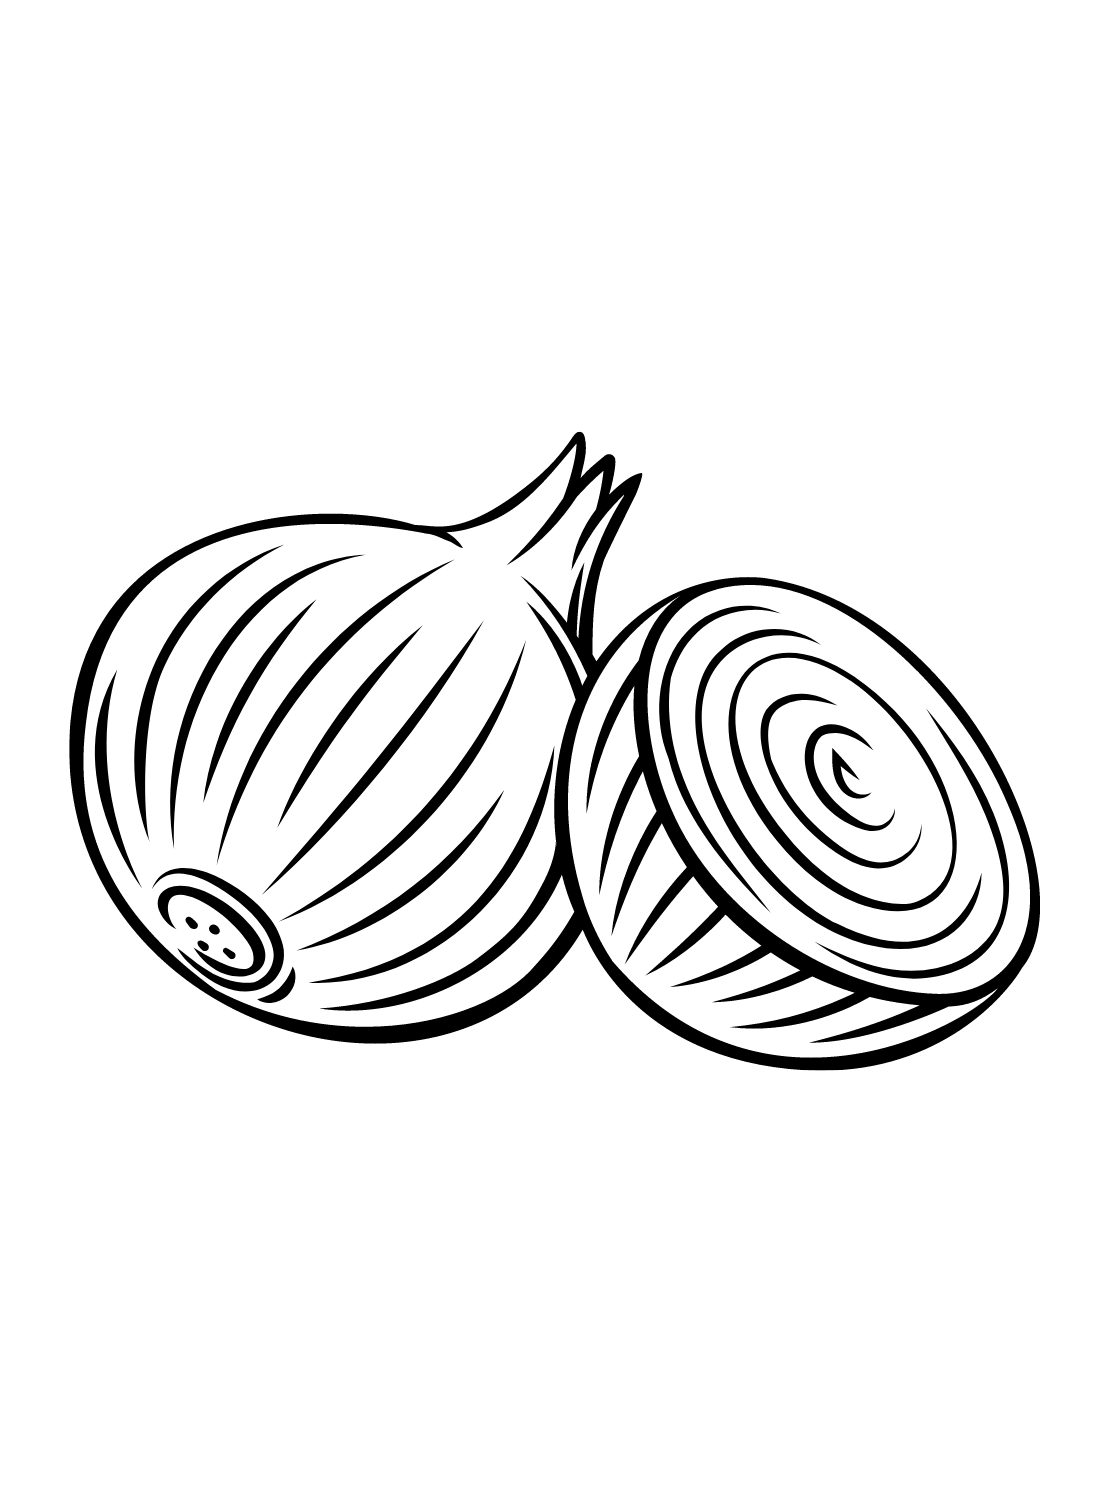 Onion coloring pages printable for free download